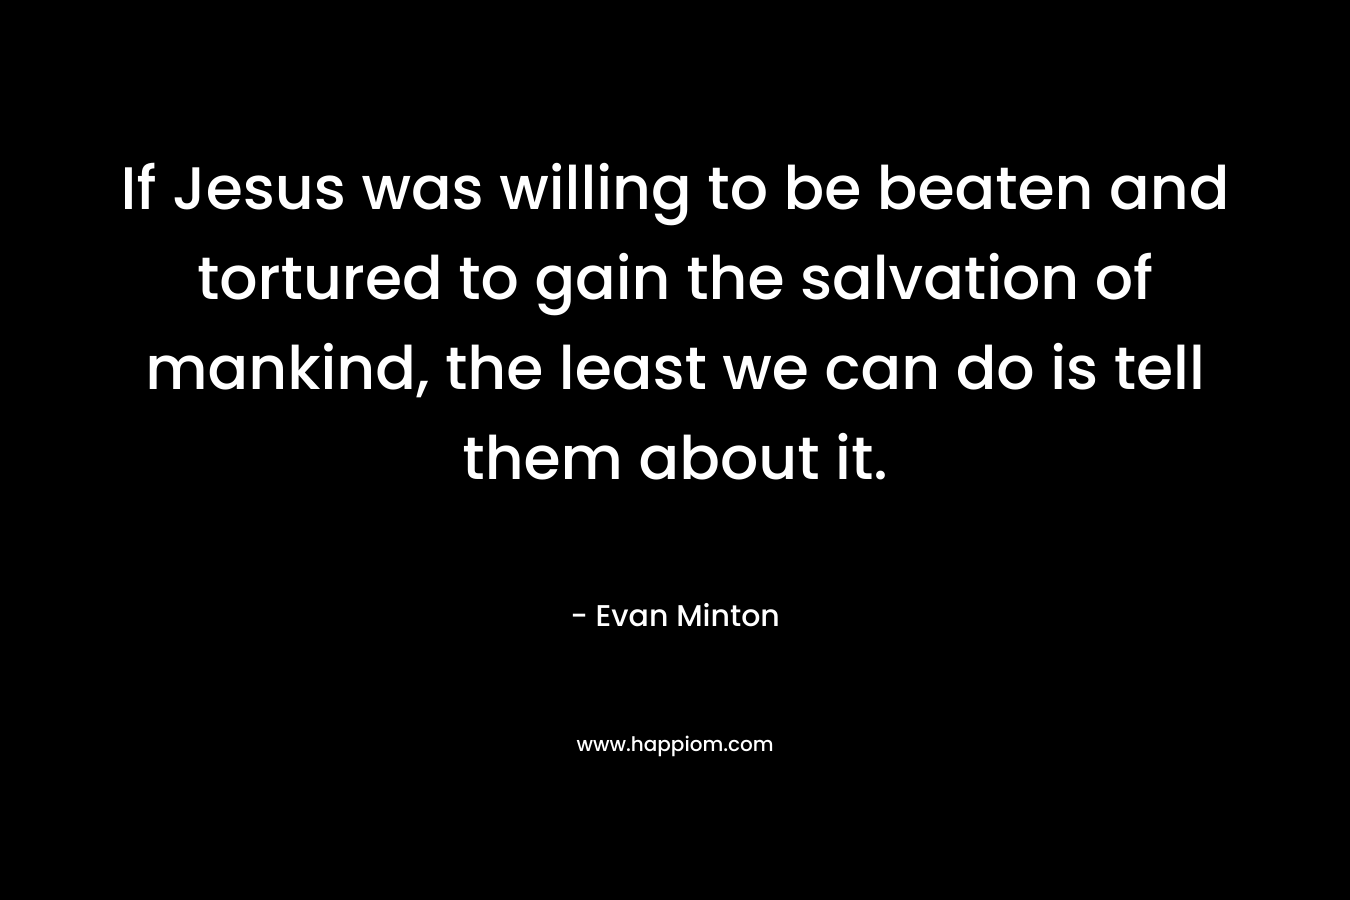 If Jesus was willing to be beaten and tortured to gain the salvation of mankind, the least we can do is tell them about it. – Evan Minton